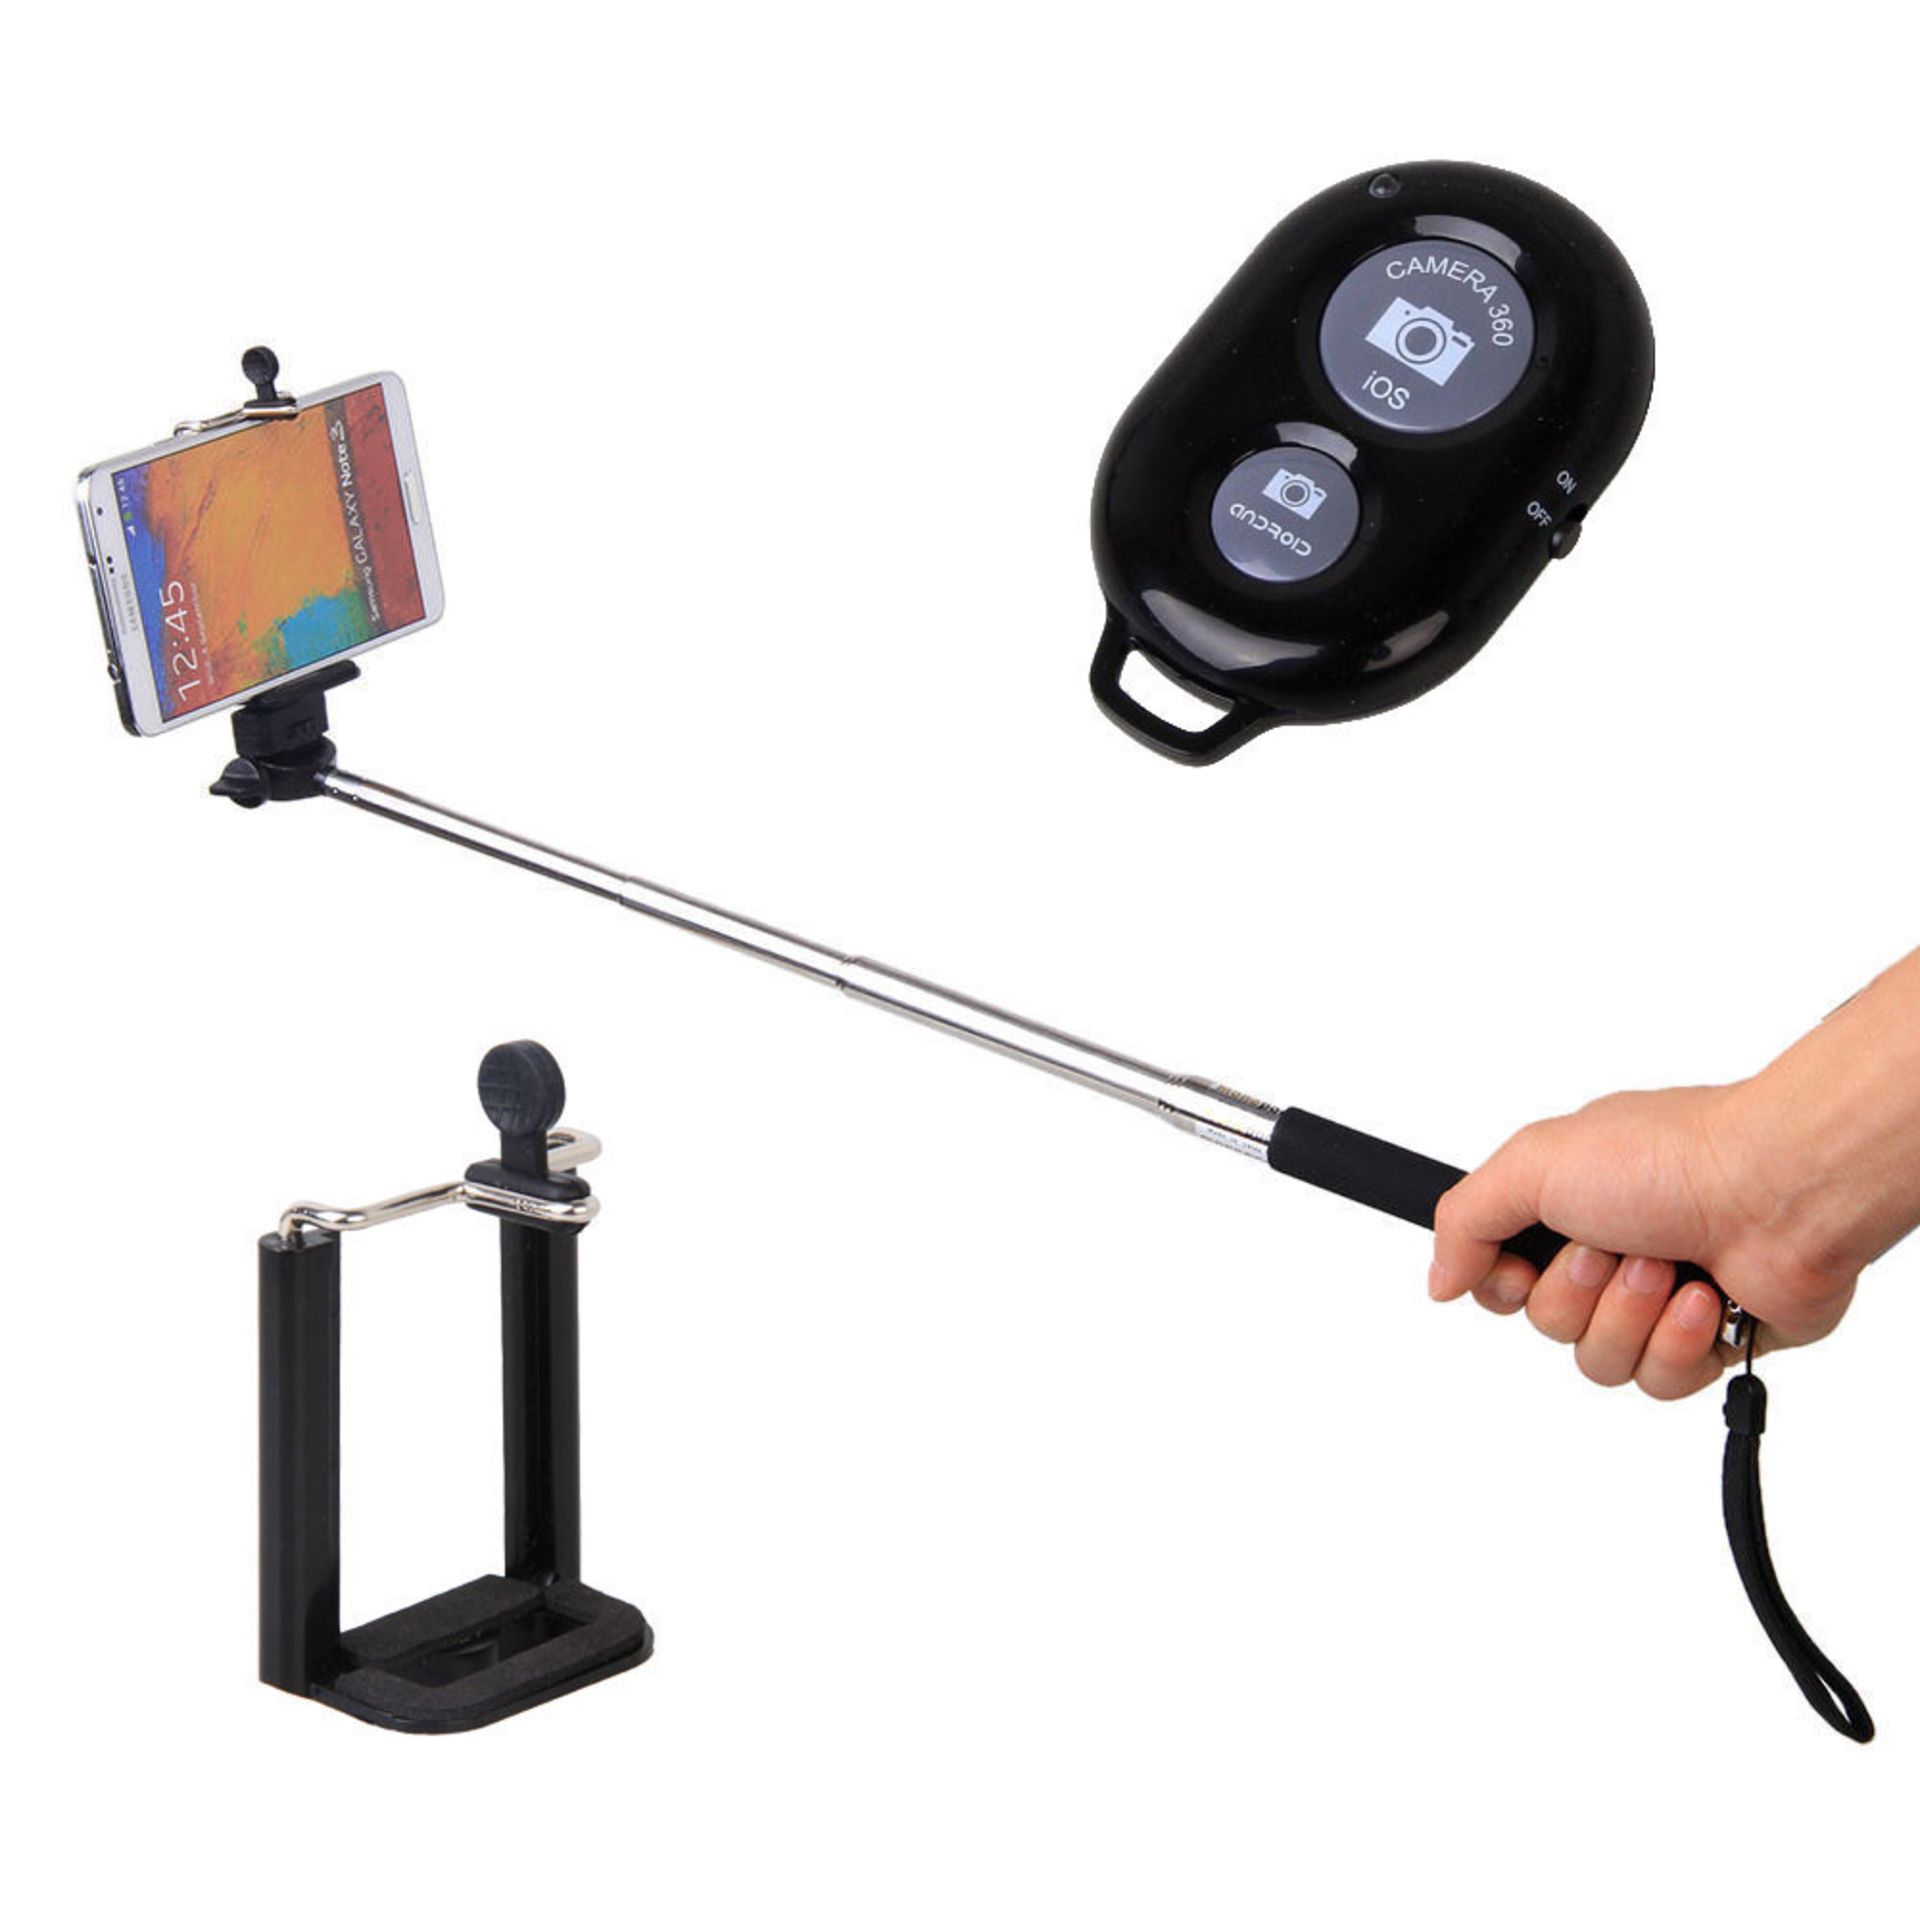 V *TRADE QTY* Brand New Selfie Stick with Bluetooth Remote Control - RRP £19.09 X 5 YOUR BID PRICE